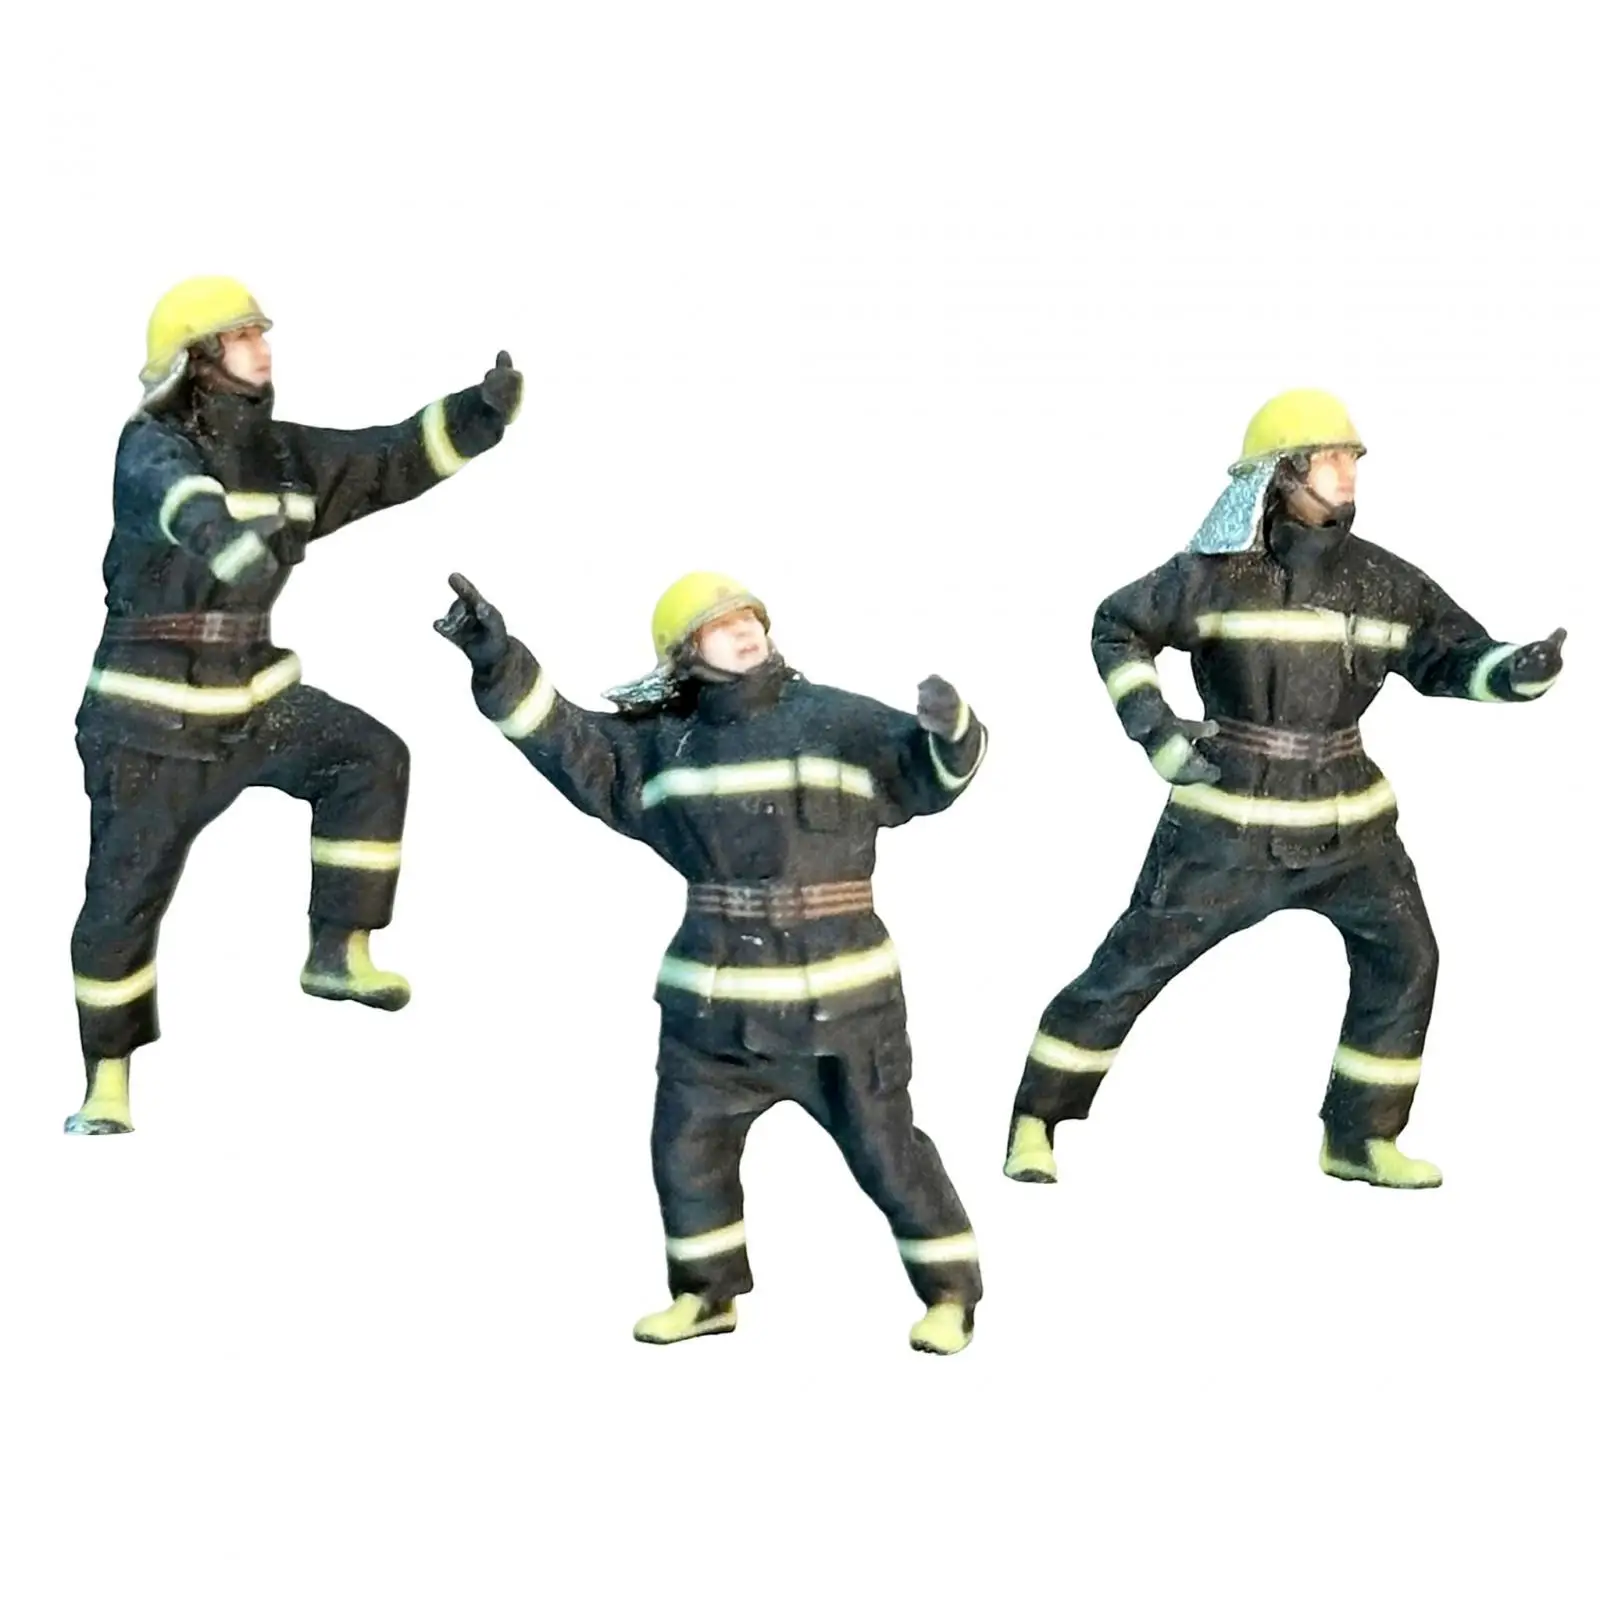 

3 Pieces Miniature Firefighter Figures Realistic Collectibles Model Trains People Figures for DIY Scene Diorama Dollhouse Decor